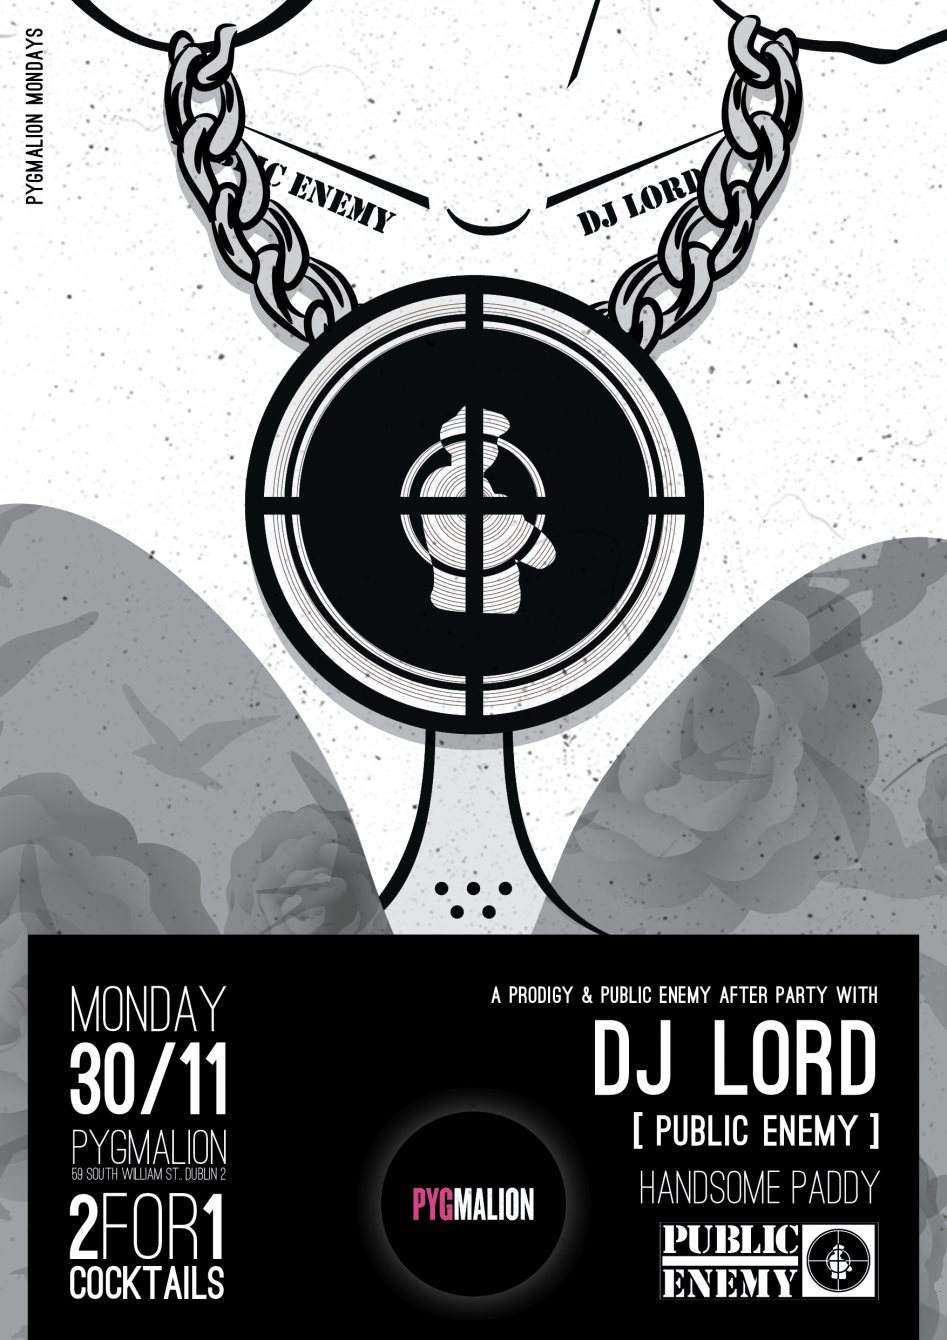 Prodigy/Public Enemy After Party with Dj Lord - Página trasera